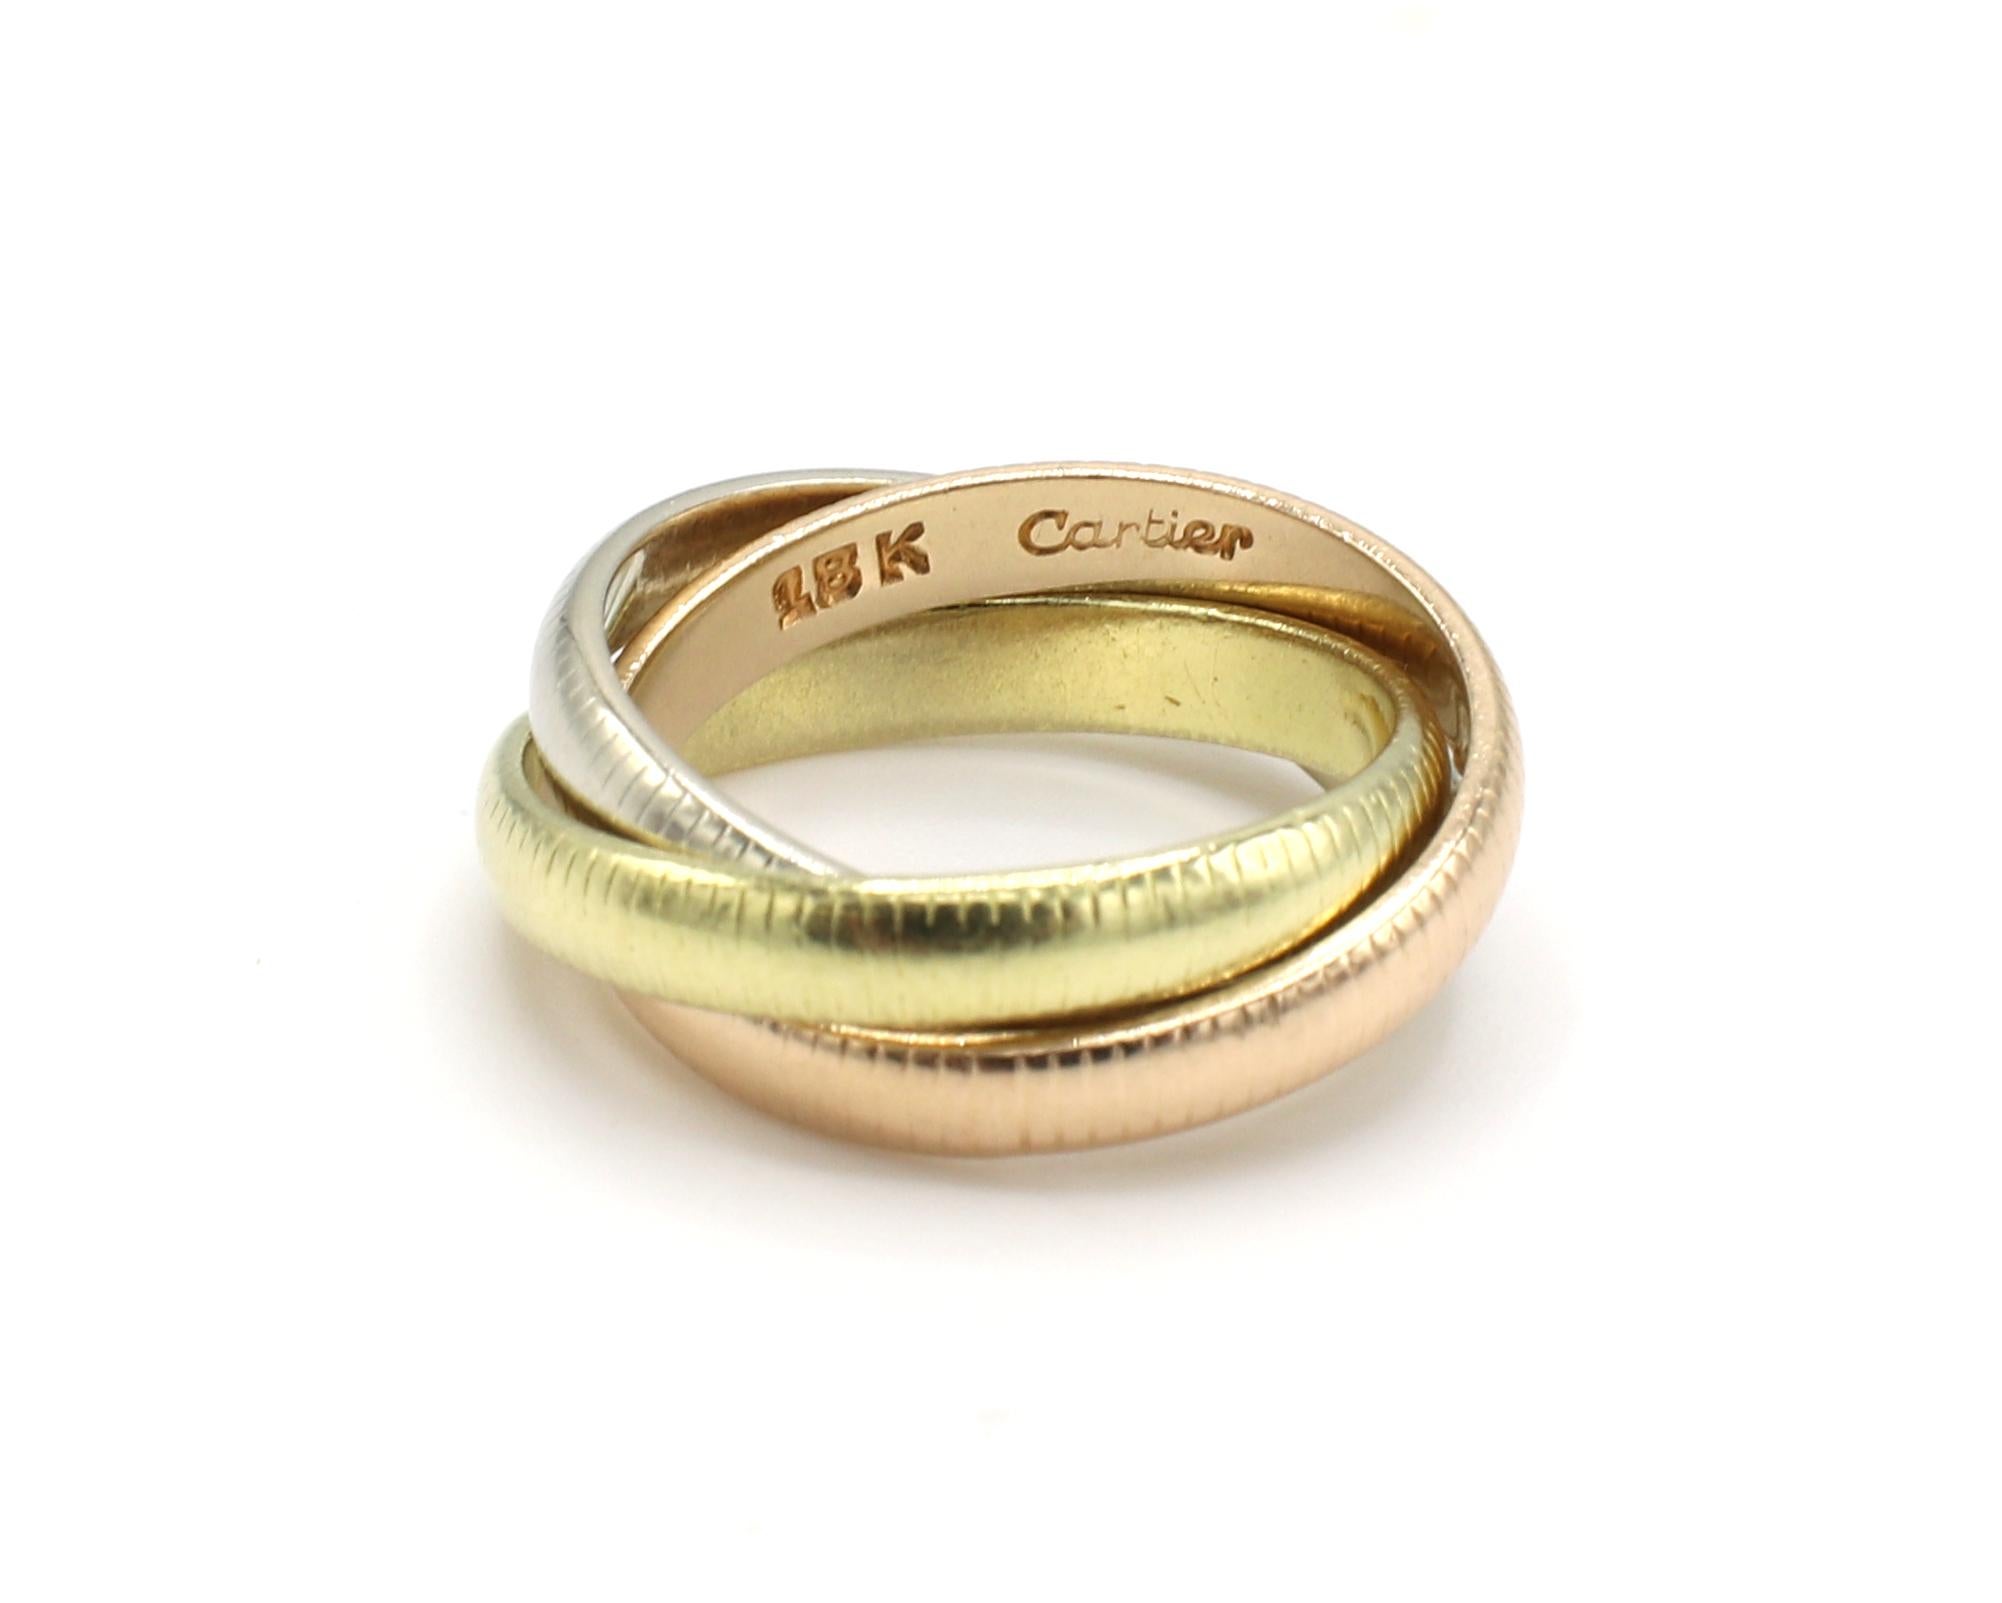 Cartier Vintage Tri-Color Trinity Rolling Ribbed Band Ring 
Metal: 18k white, yellow, rose gold
Weight: 5.50 grams
Width: Each ring is 2.5mm
Size: 2.5-3 (US) *pinky ring 
